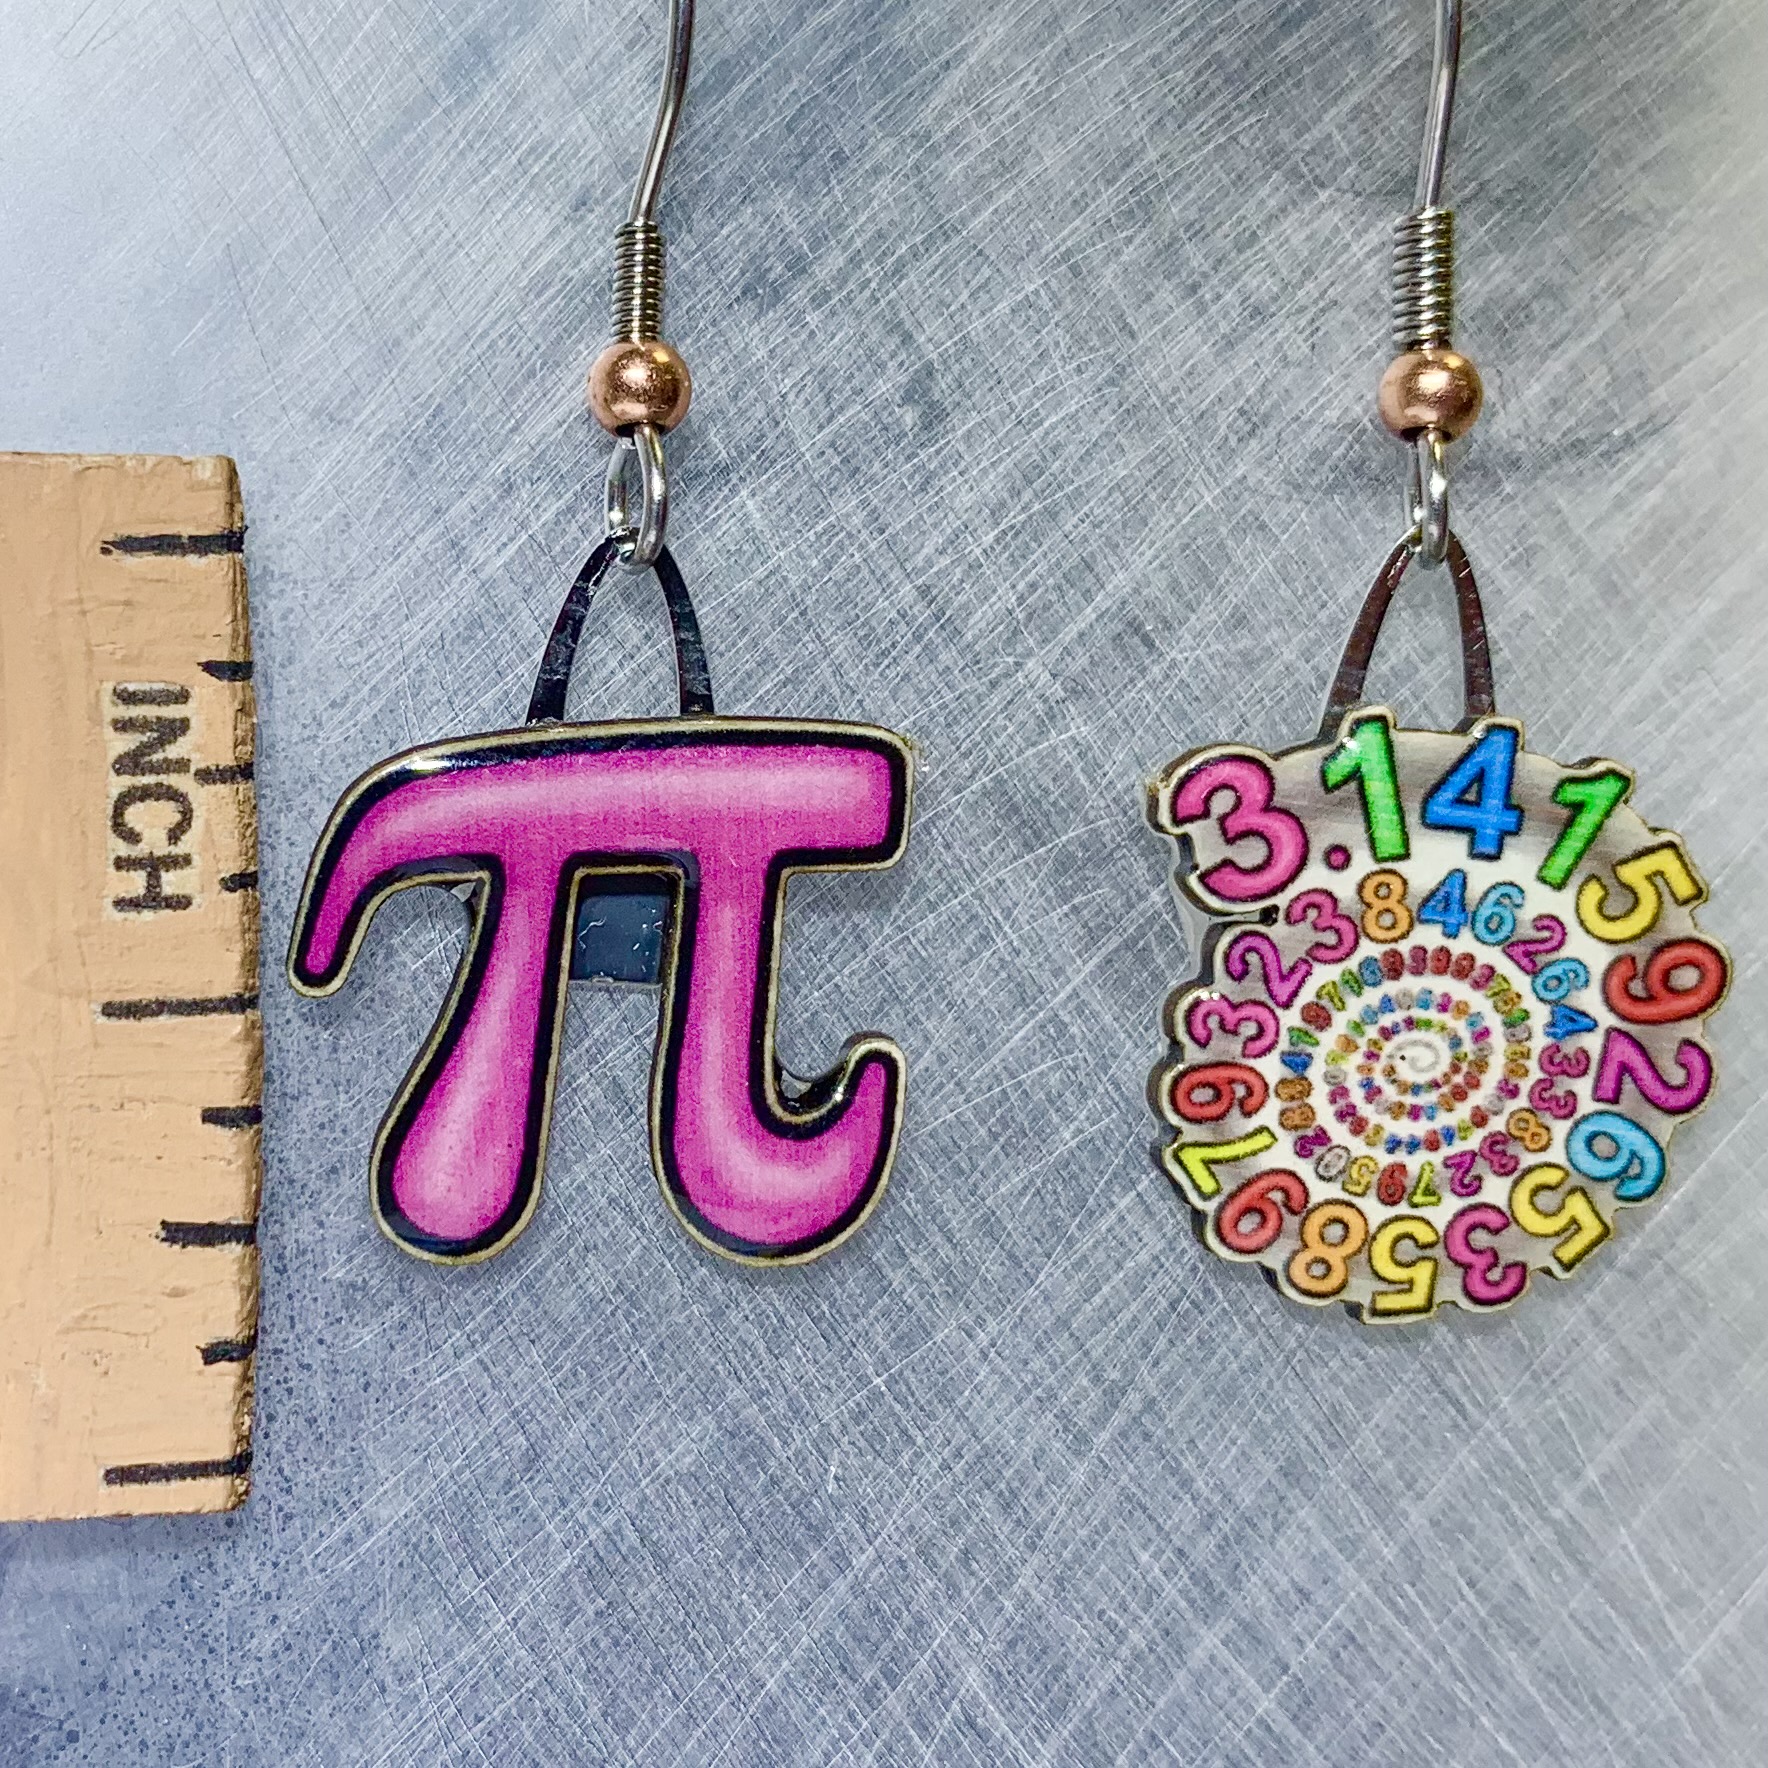 Picture shown is of 1 inch tall pair of earrings of the number Pi.